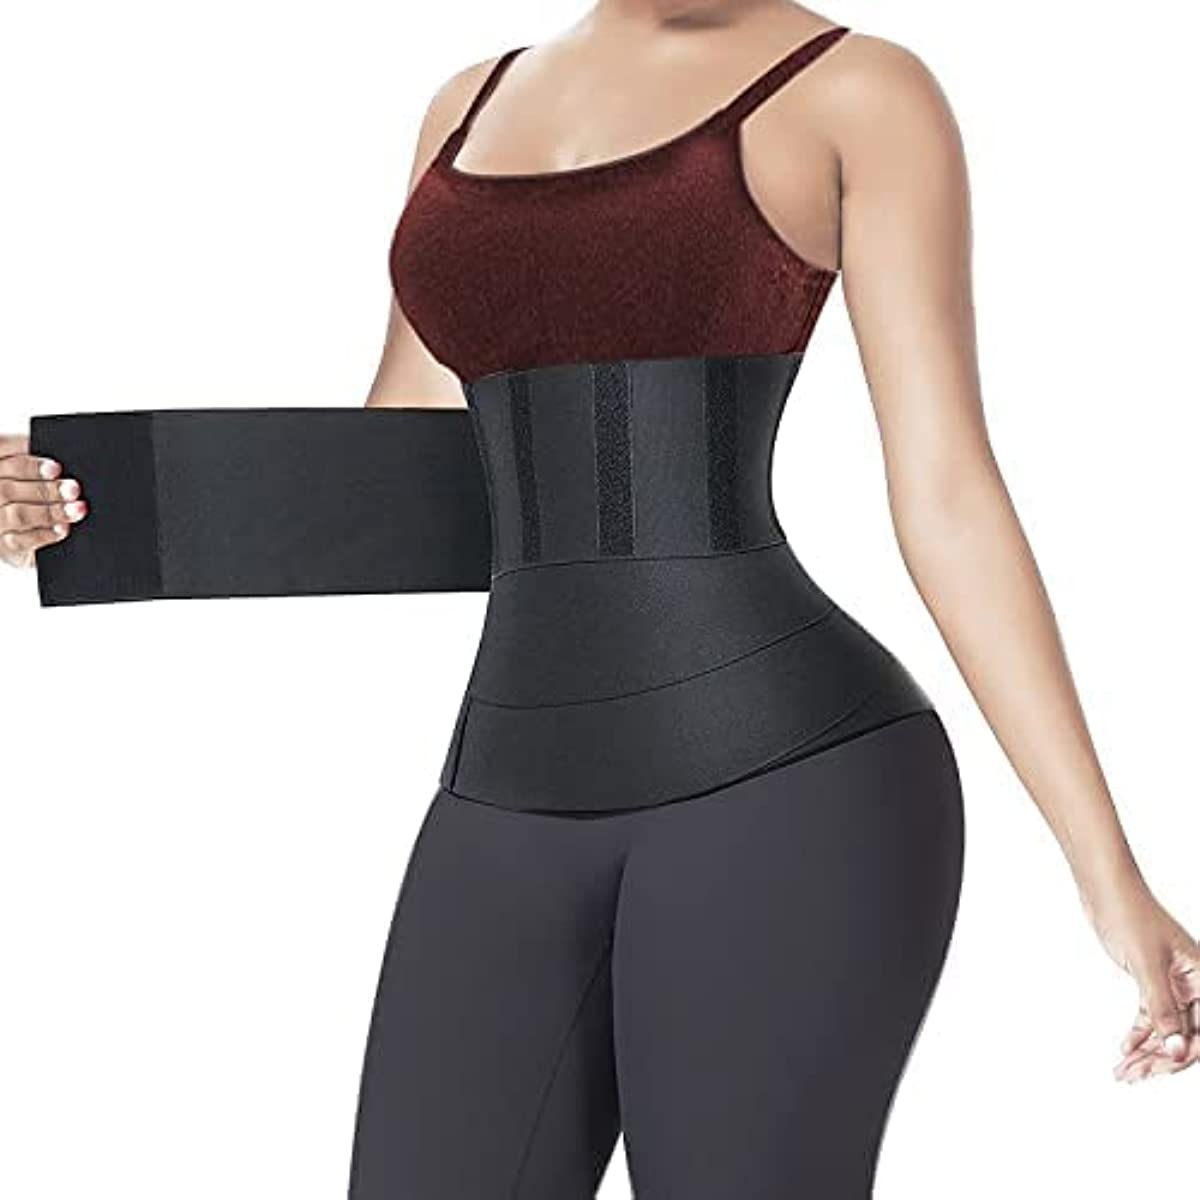 Snatch Me Up Bandage Wrap Waist Trainer For Women Lower Belly Waist Wraps For Stomach Wraps Plus Size